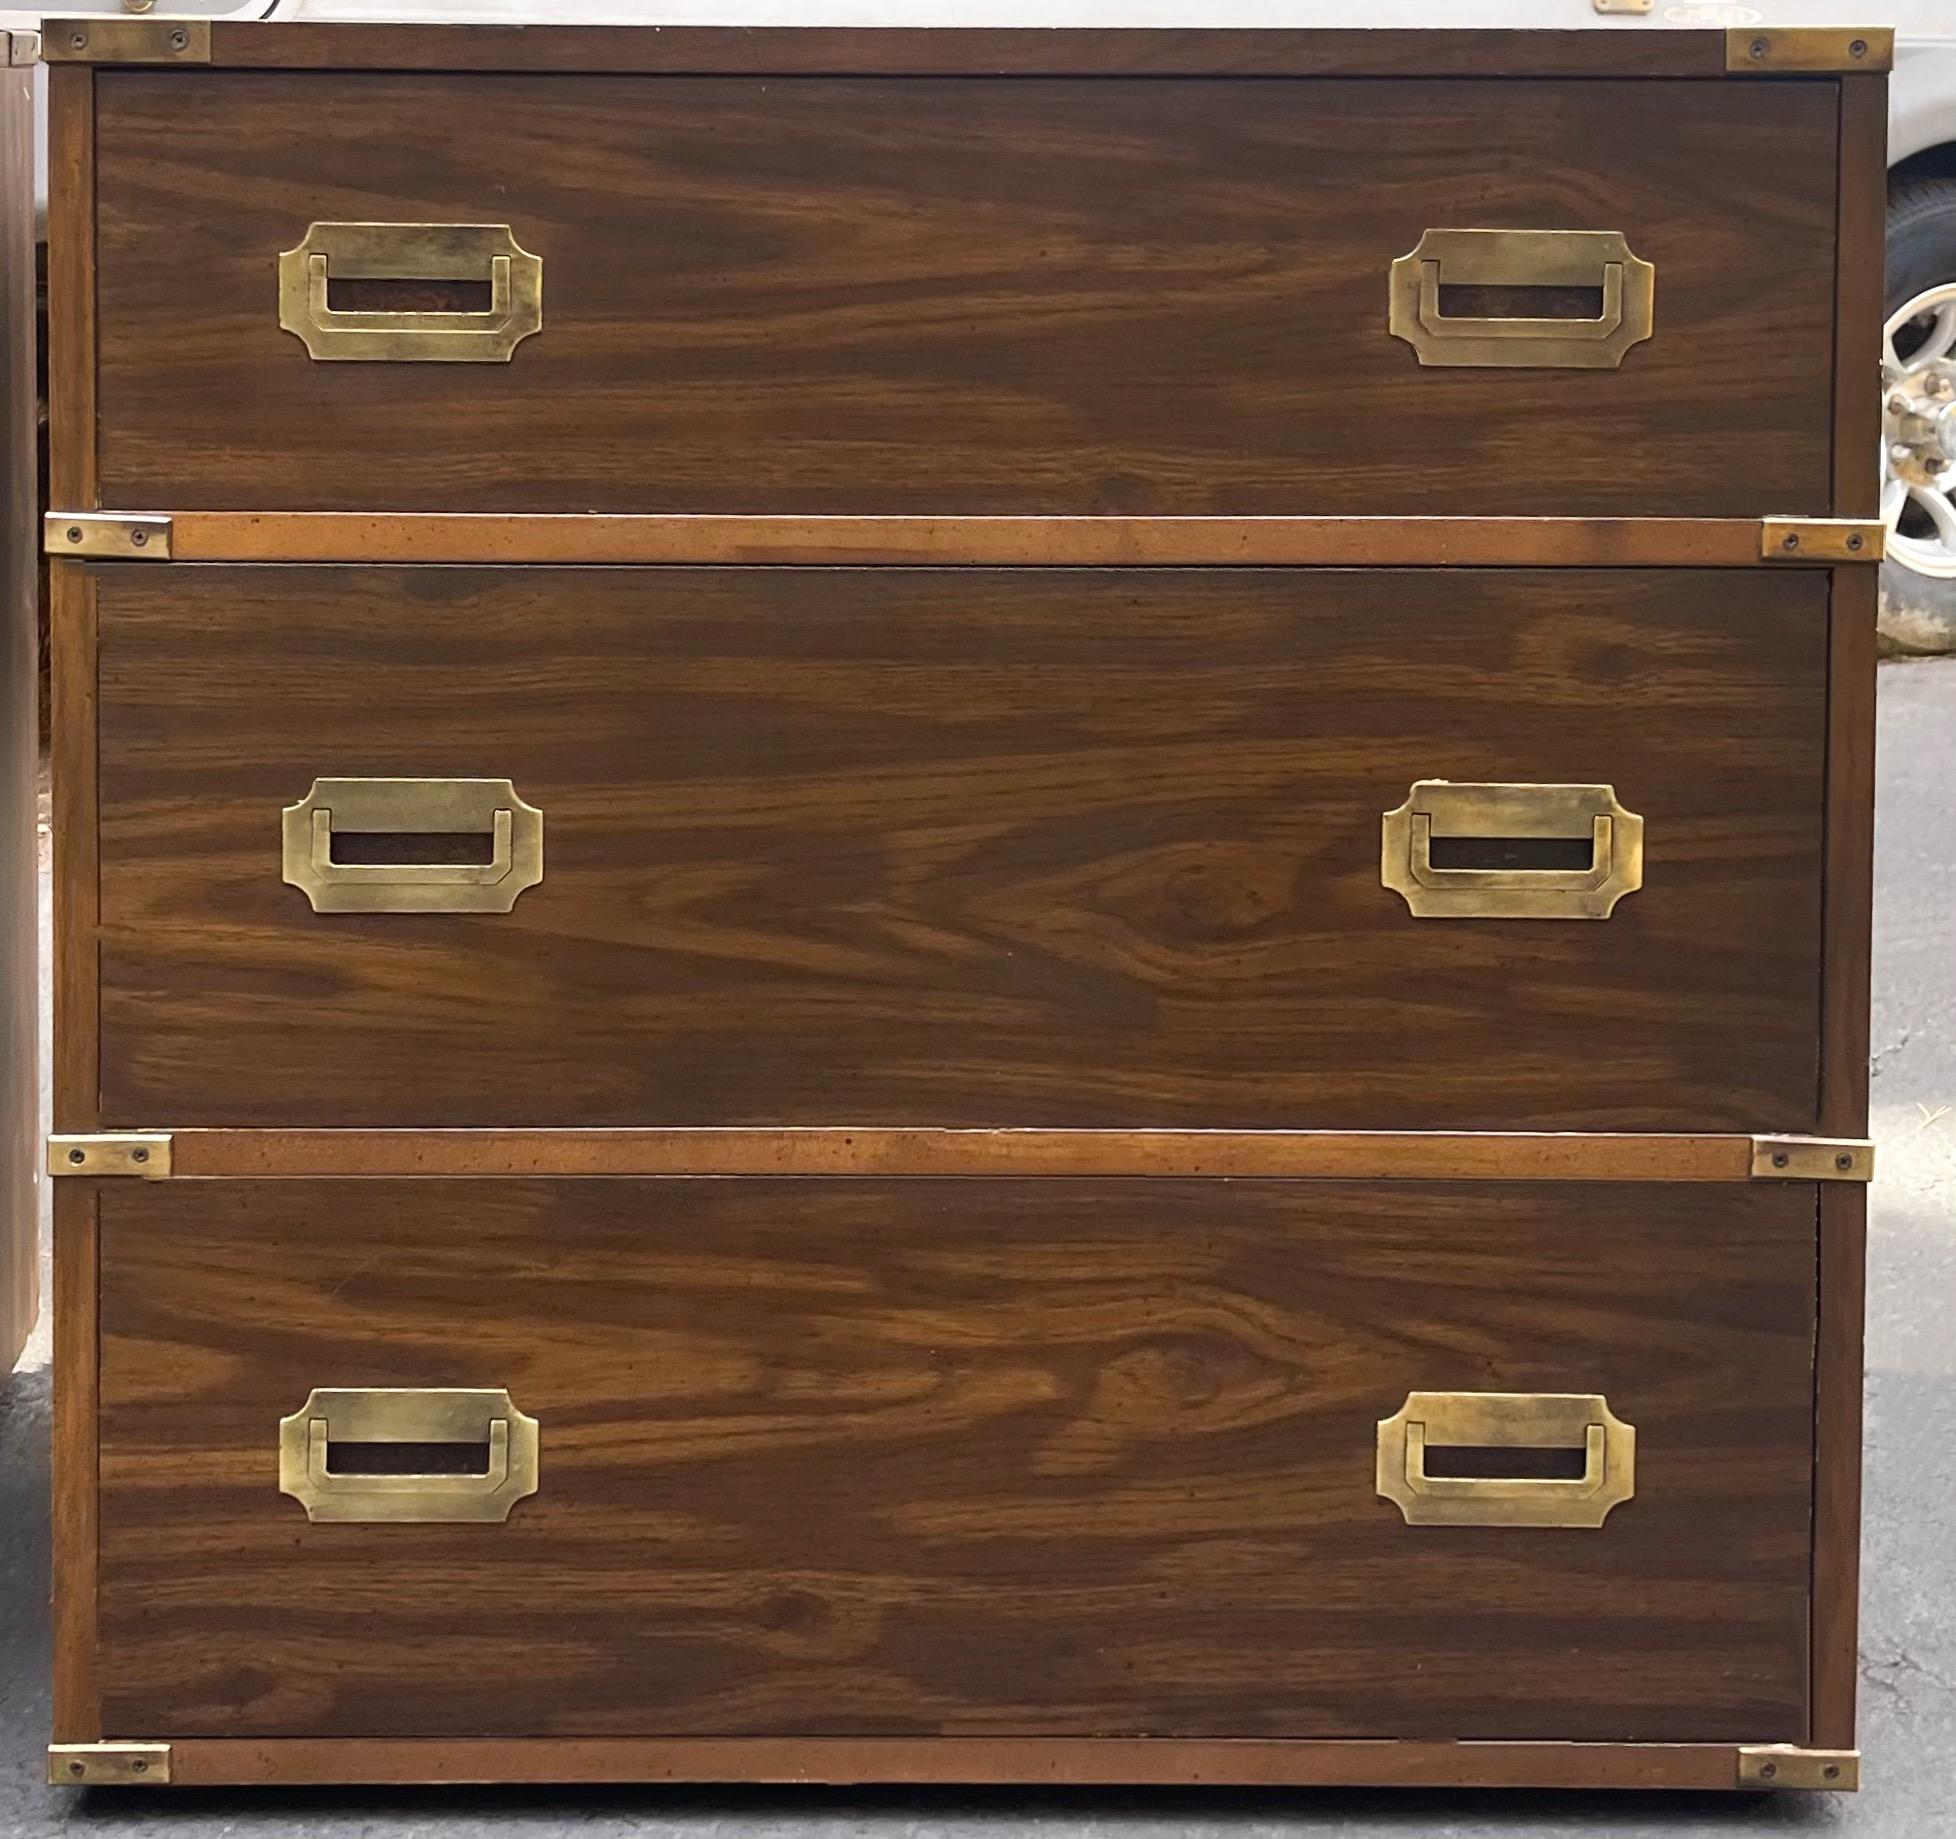 This is a pair of campaign style chests / commodes attributed to Henredon. They are not marked and do have dovetail construction. The hardware is original. The wood has an oak finish. The chests have small bun feet.

My shipping is for the